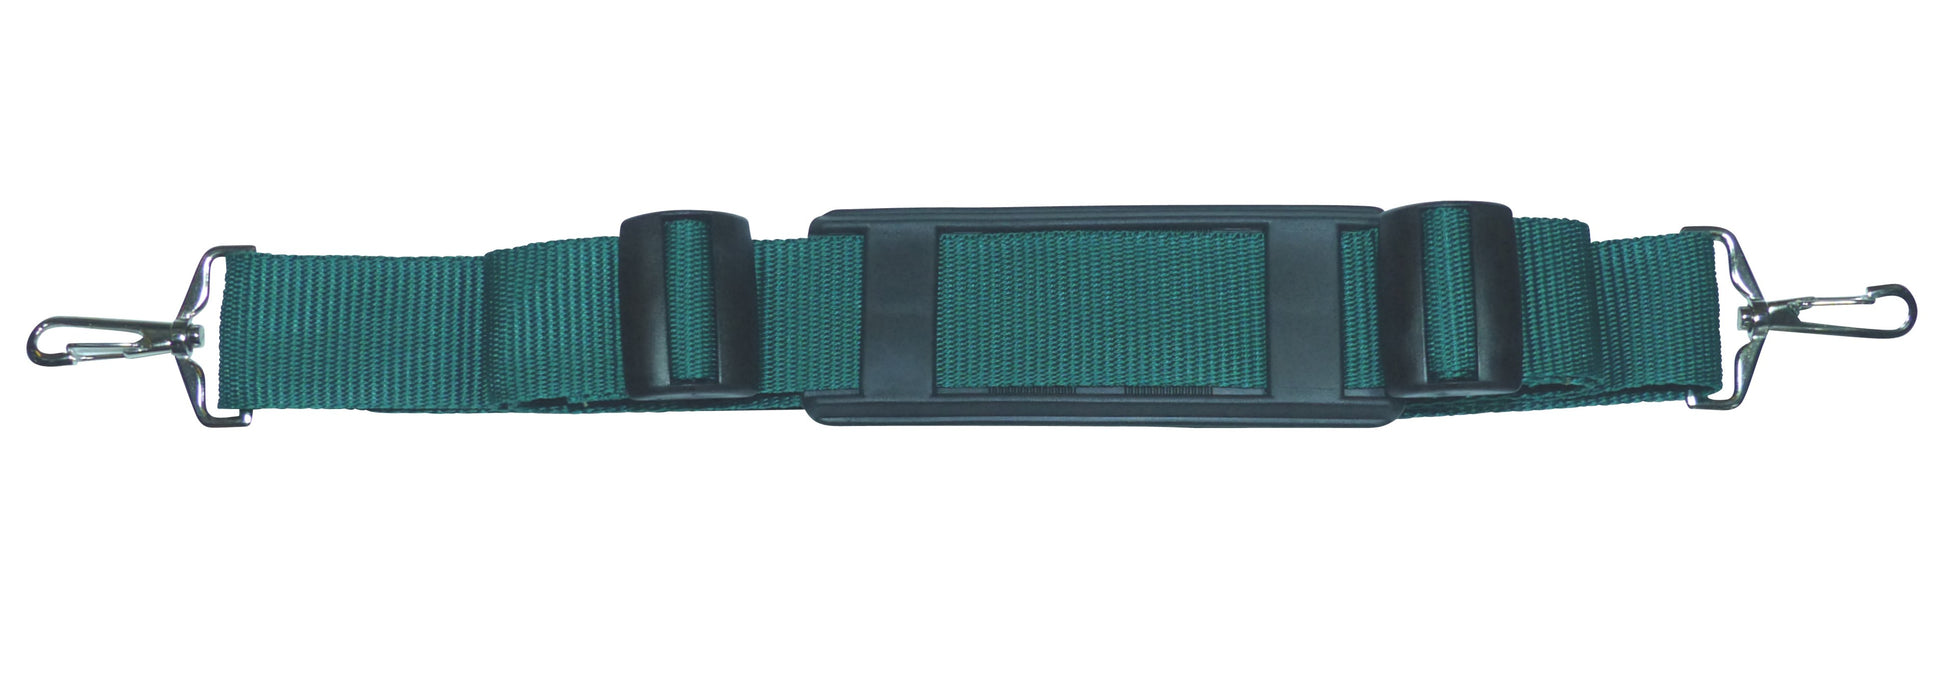 38mm Bag Strap with Metal Buckles and Shoulder Pad, 150cm in emerald green